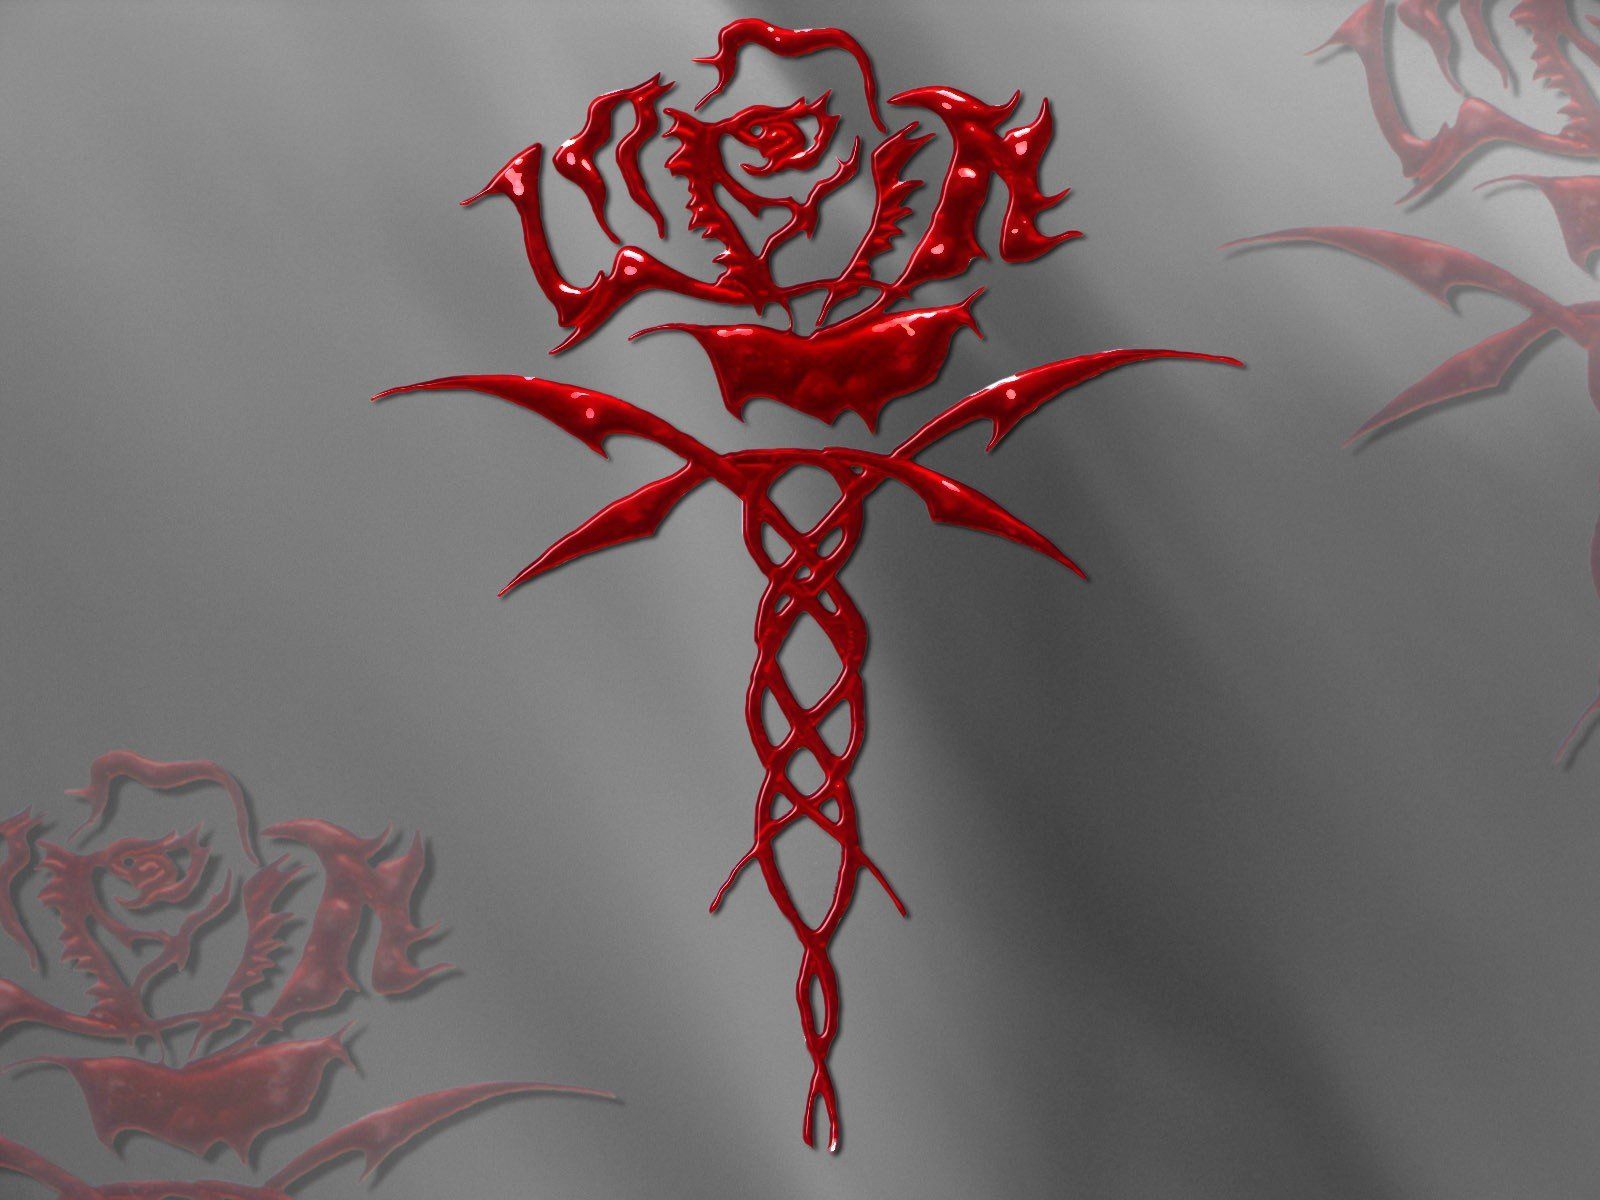 Free download Blood rose wallpaper HD Tumblr For Walls for Mobile